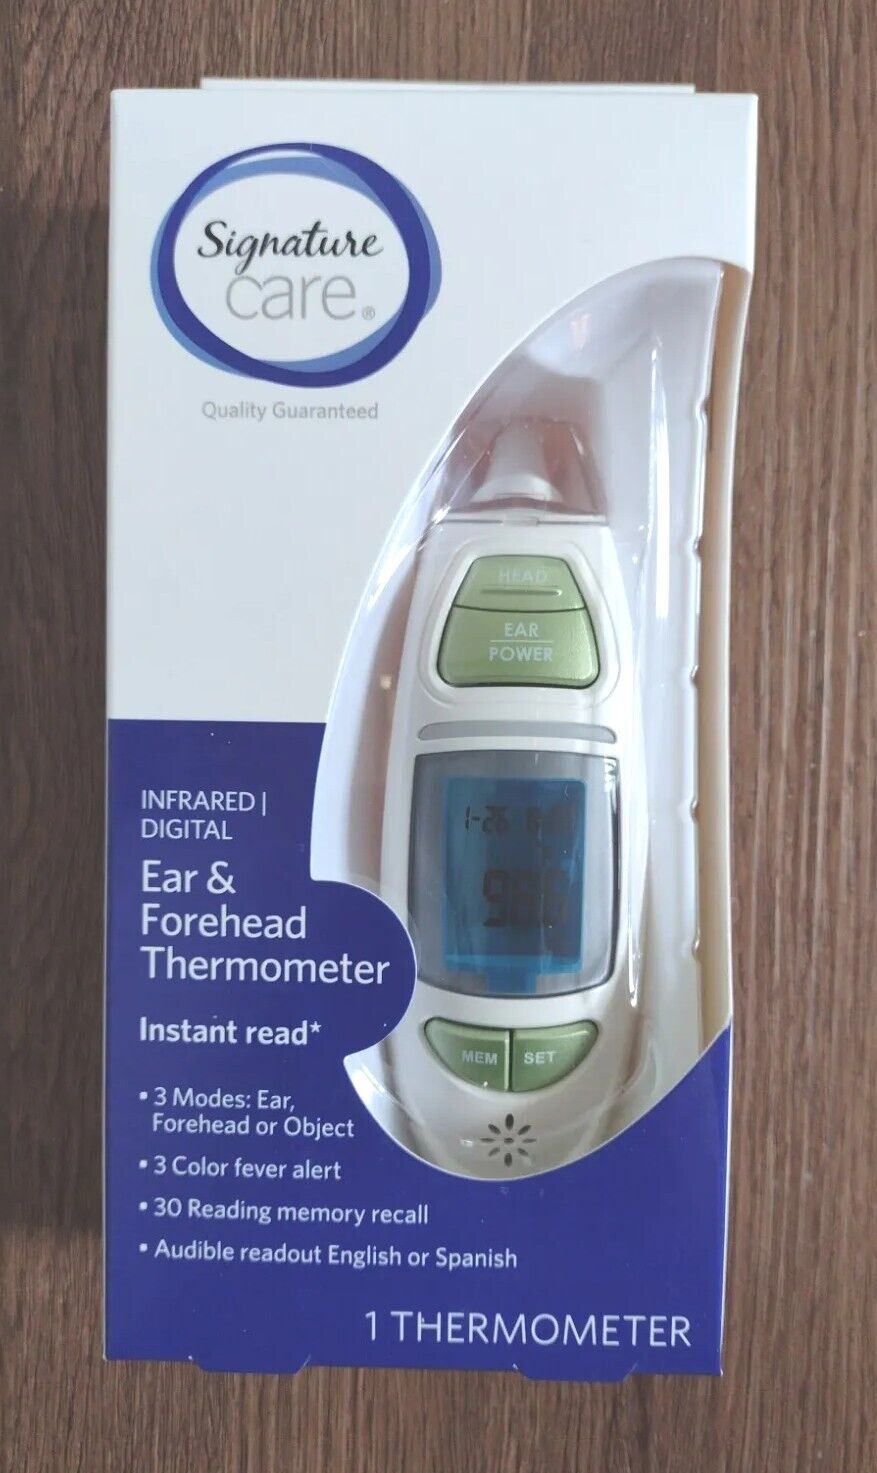 Signature Care Infrared Digital Forehead and Ear Thermometer Instant Read